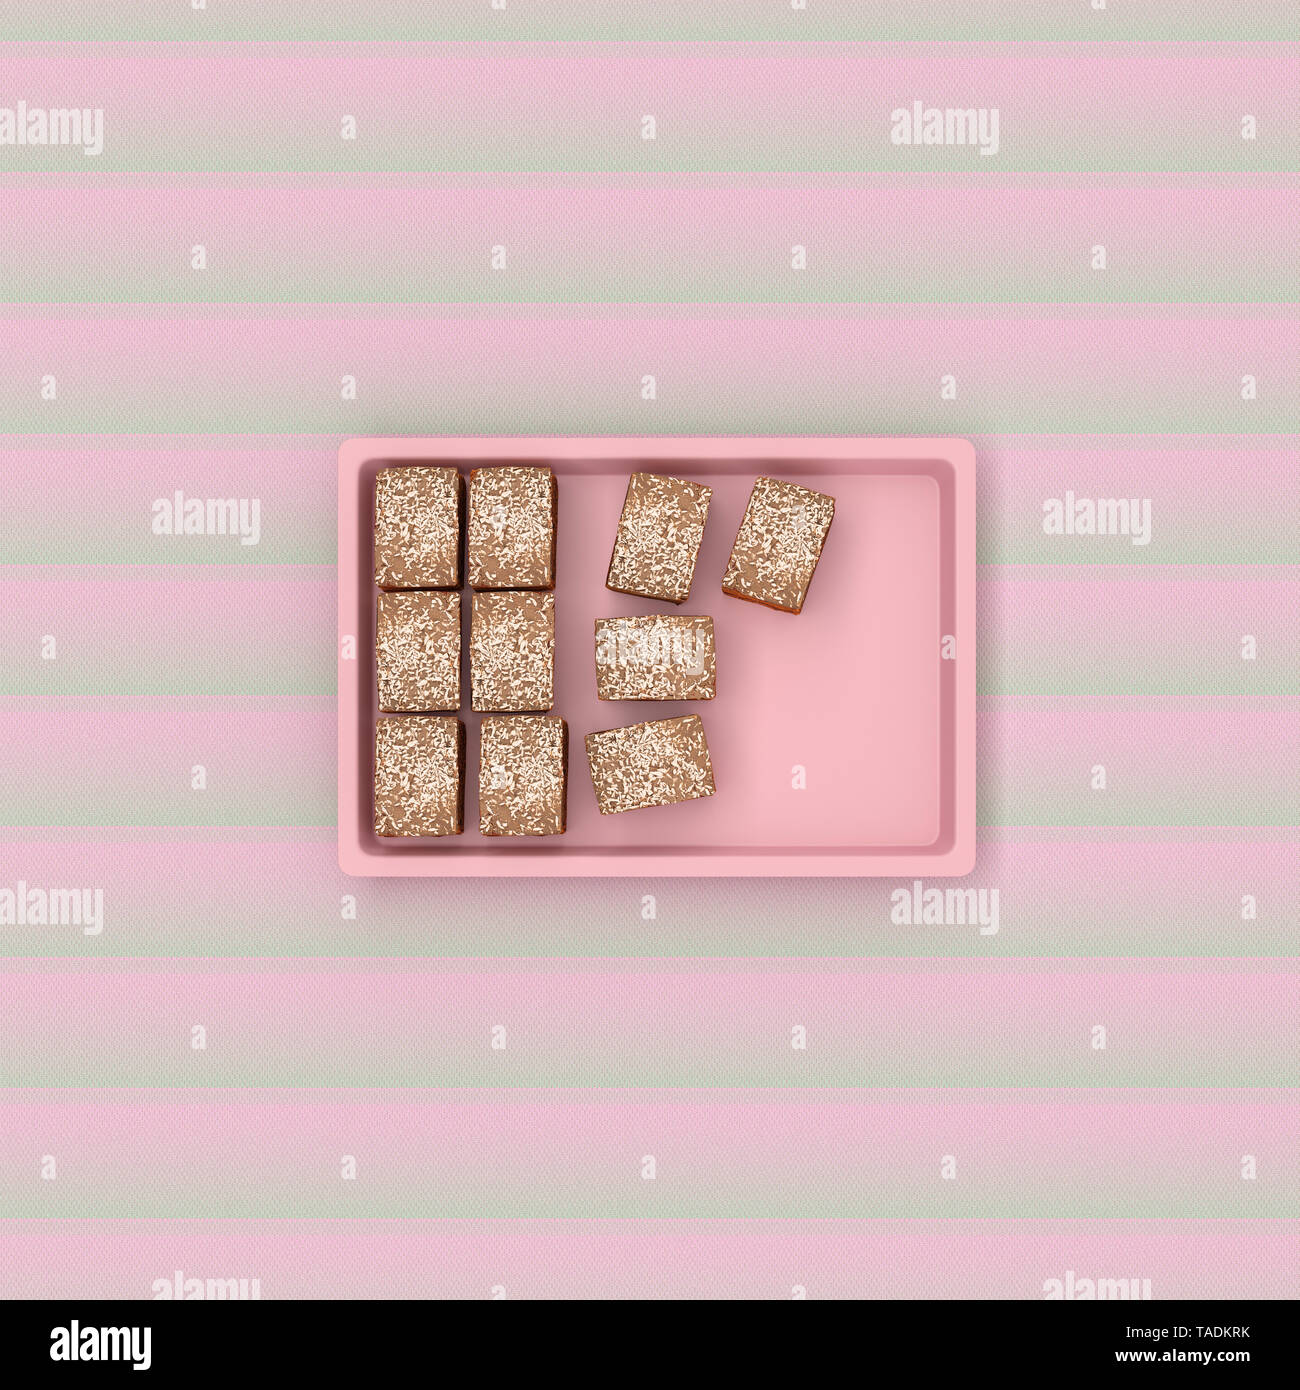 3D rendering, Cheese cake on baking tray on patterned background Stock Photo